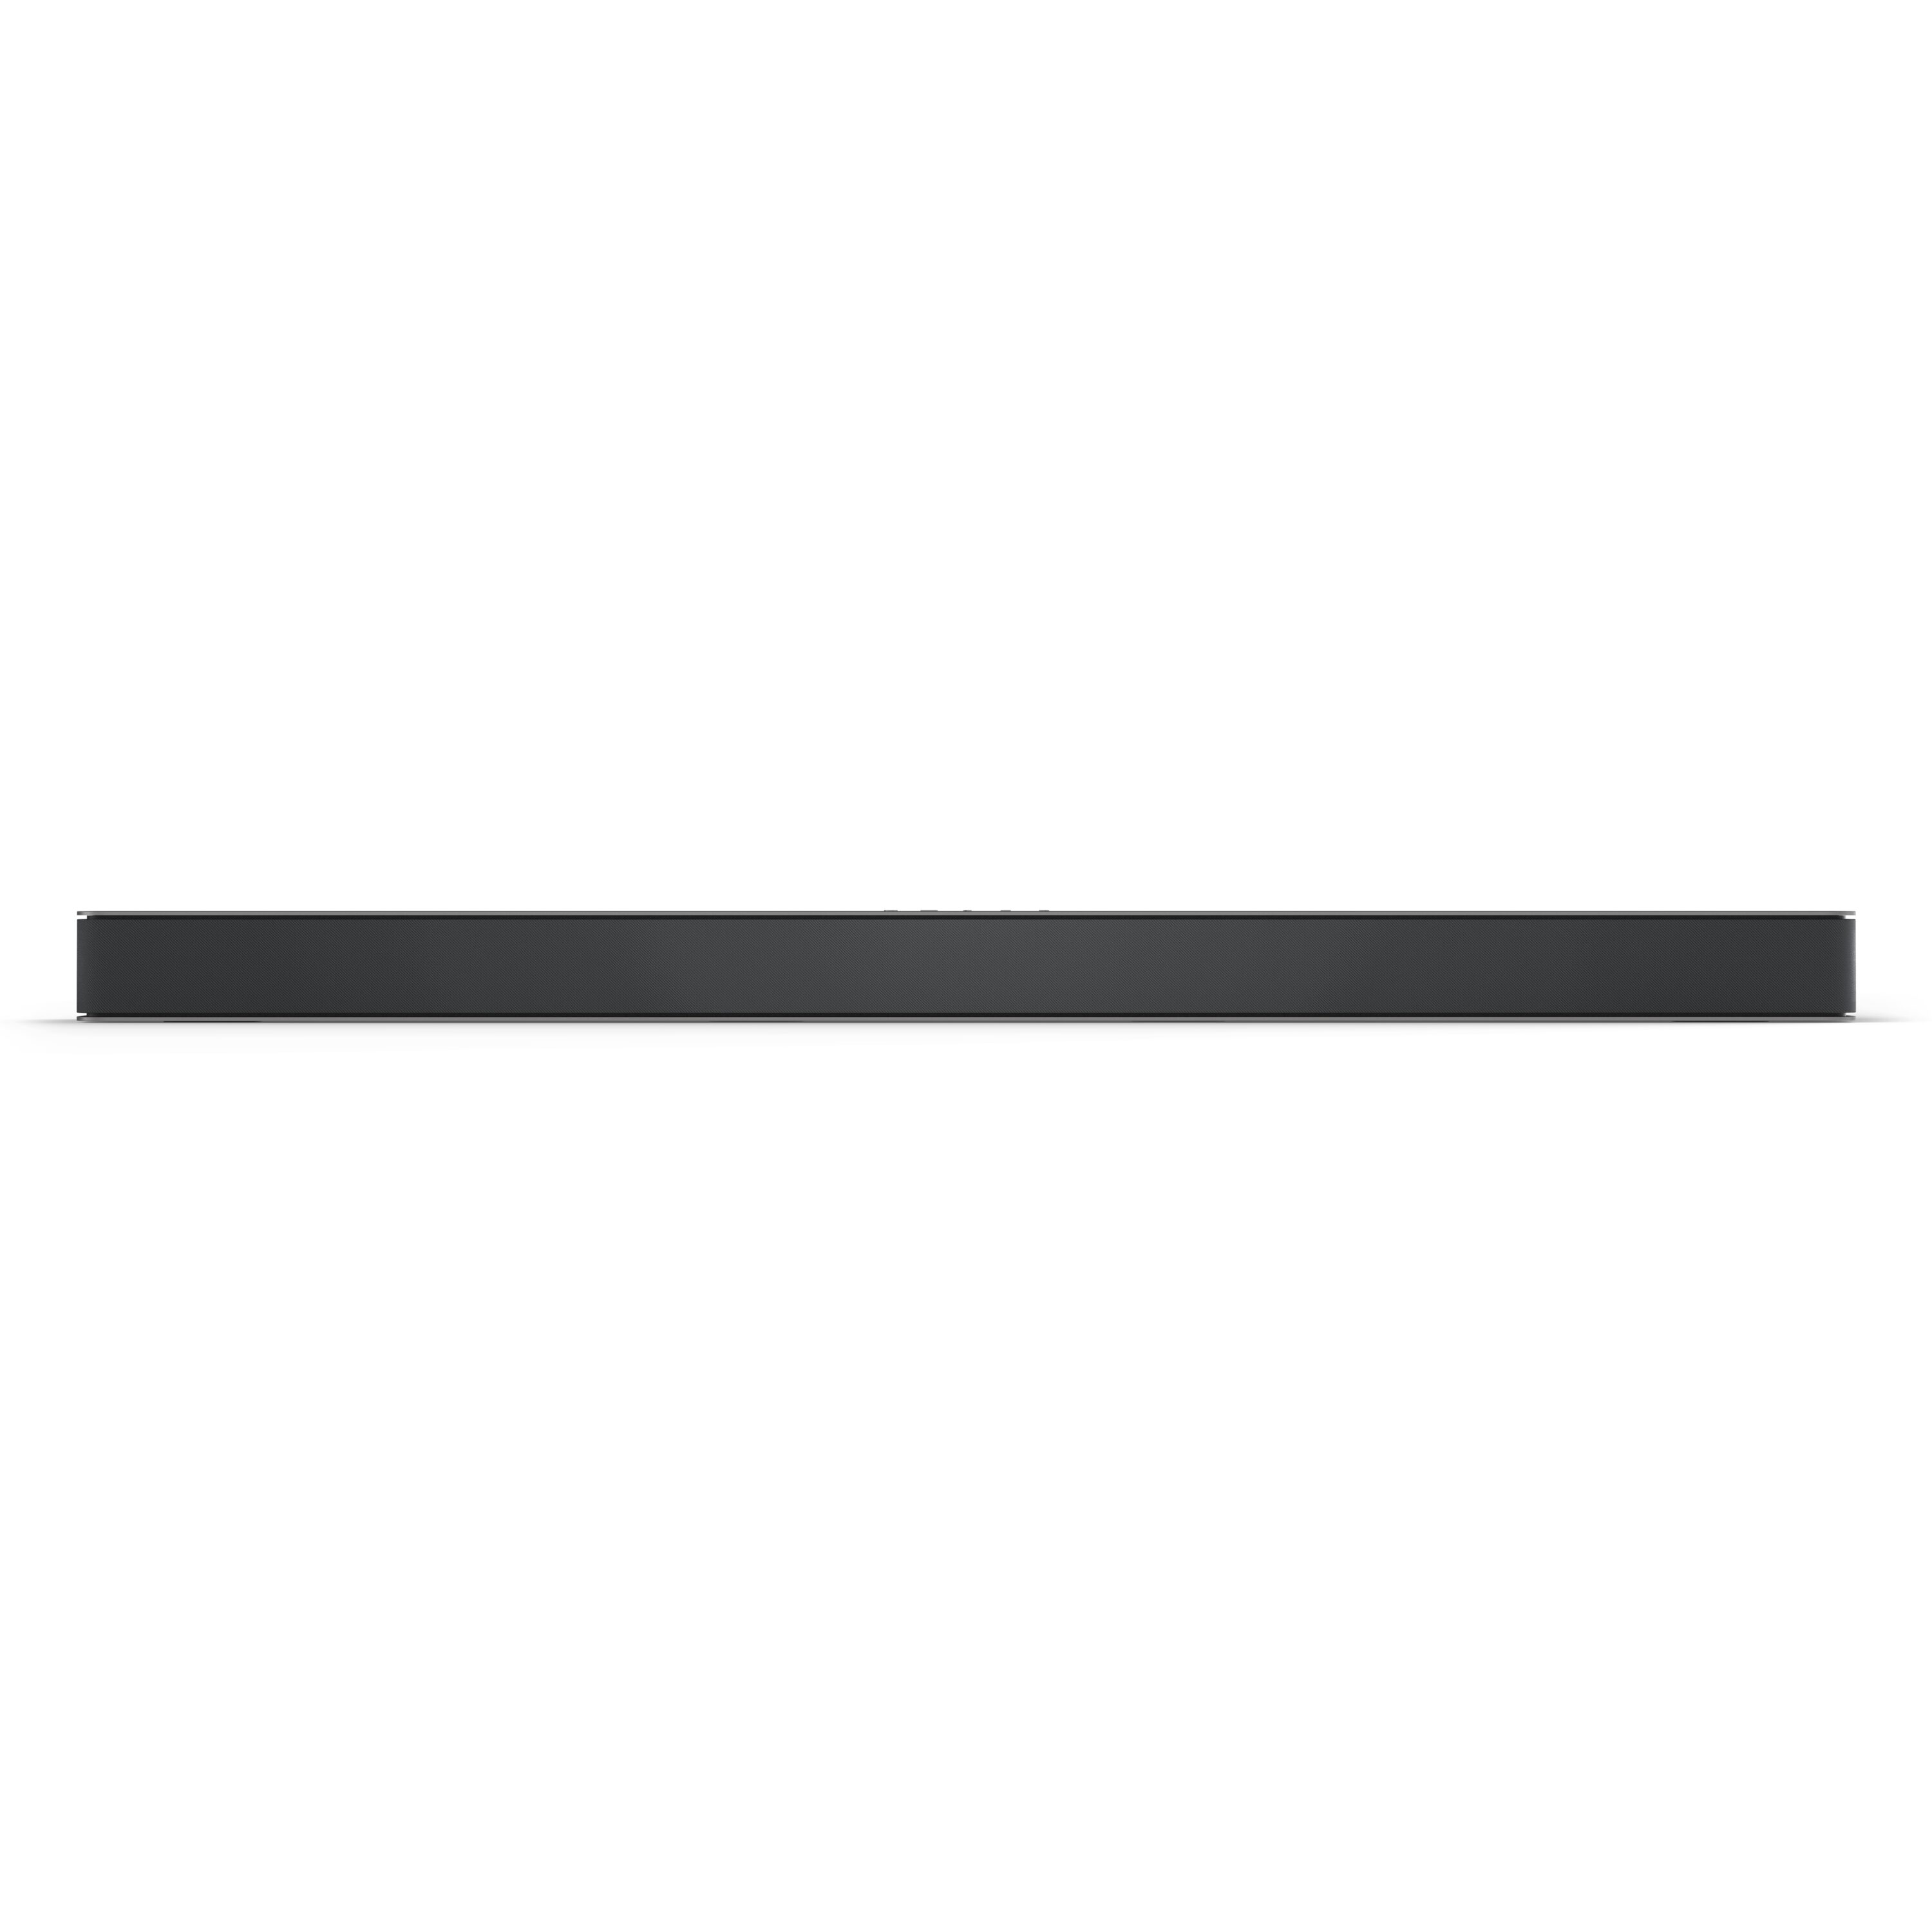 VIZIO M-Series 2.1 Premium Sound Bar with Dolby Atmos, DTS:X, Wireless Subwoofer M215a-J6 - image 8 of 21